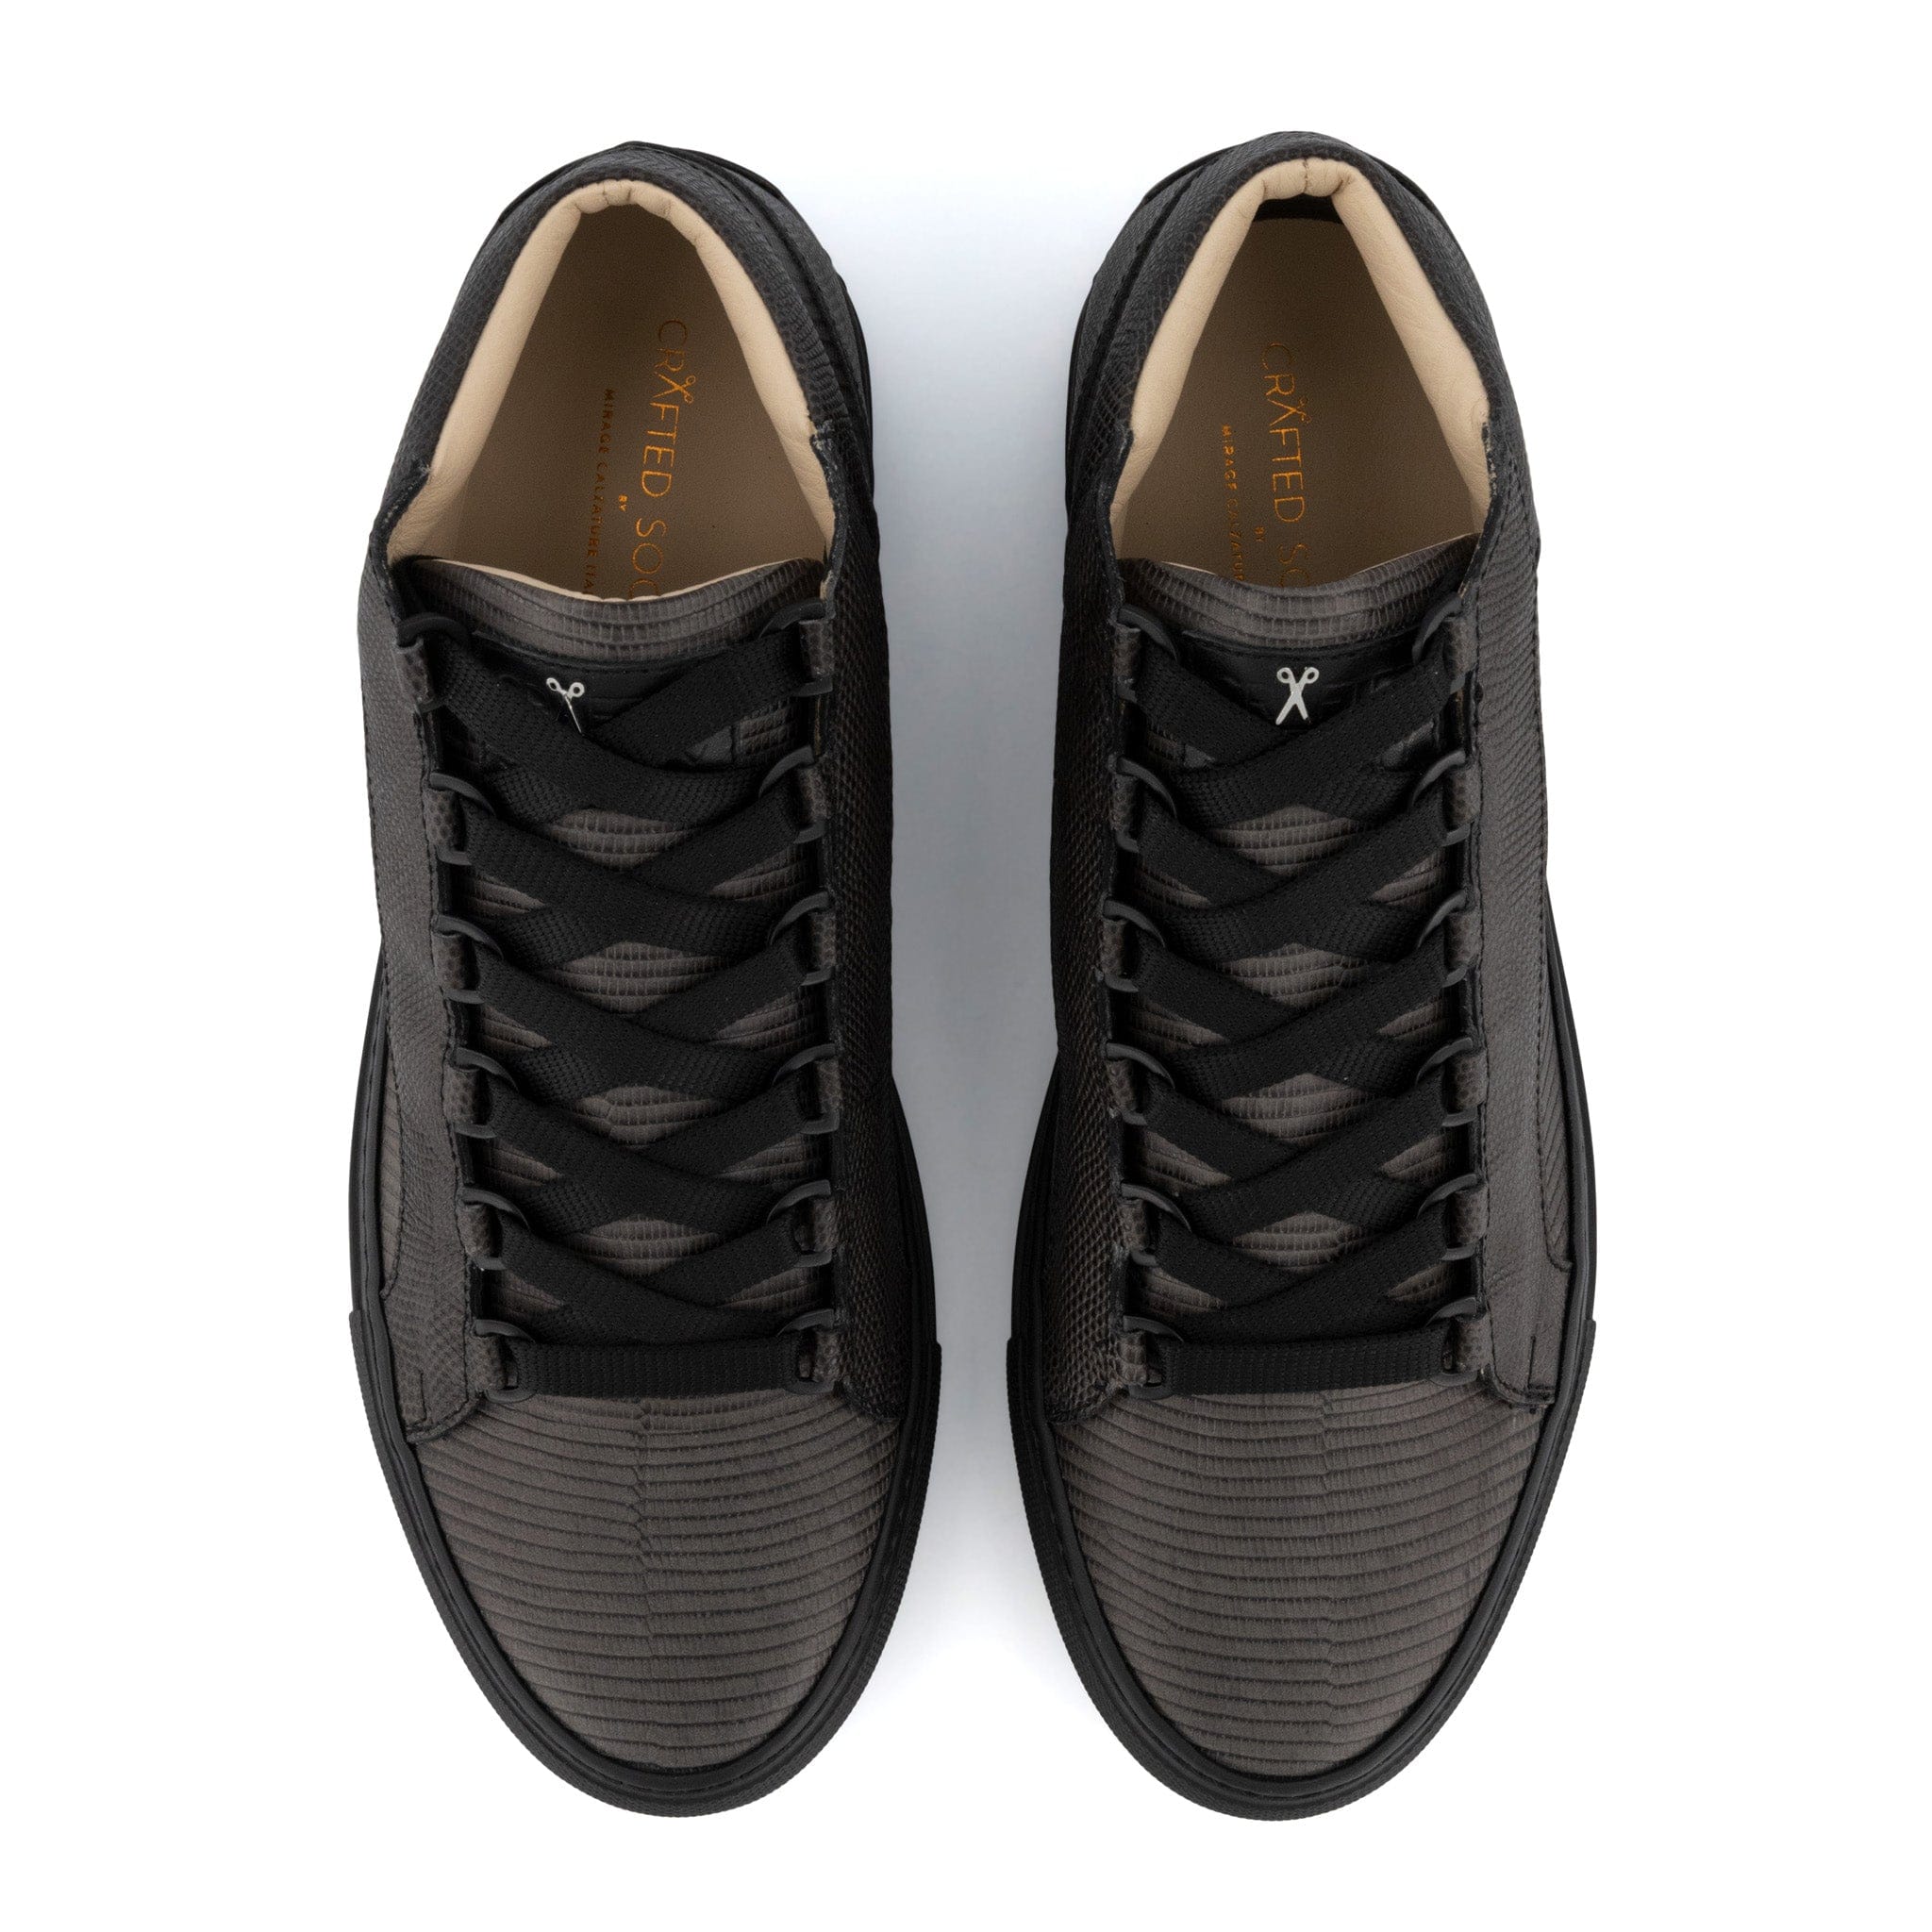 Rico Mid LTD EDN | Grey & Black full grain leather | Black Outsole | Made in Italy | Size 40